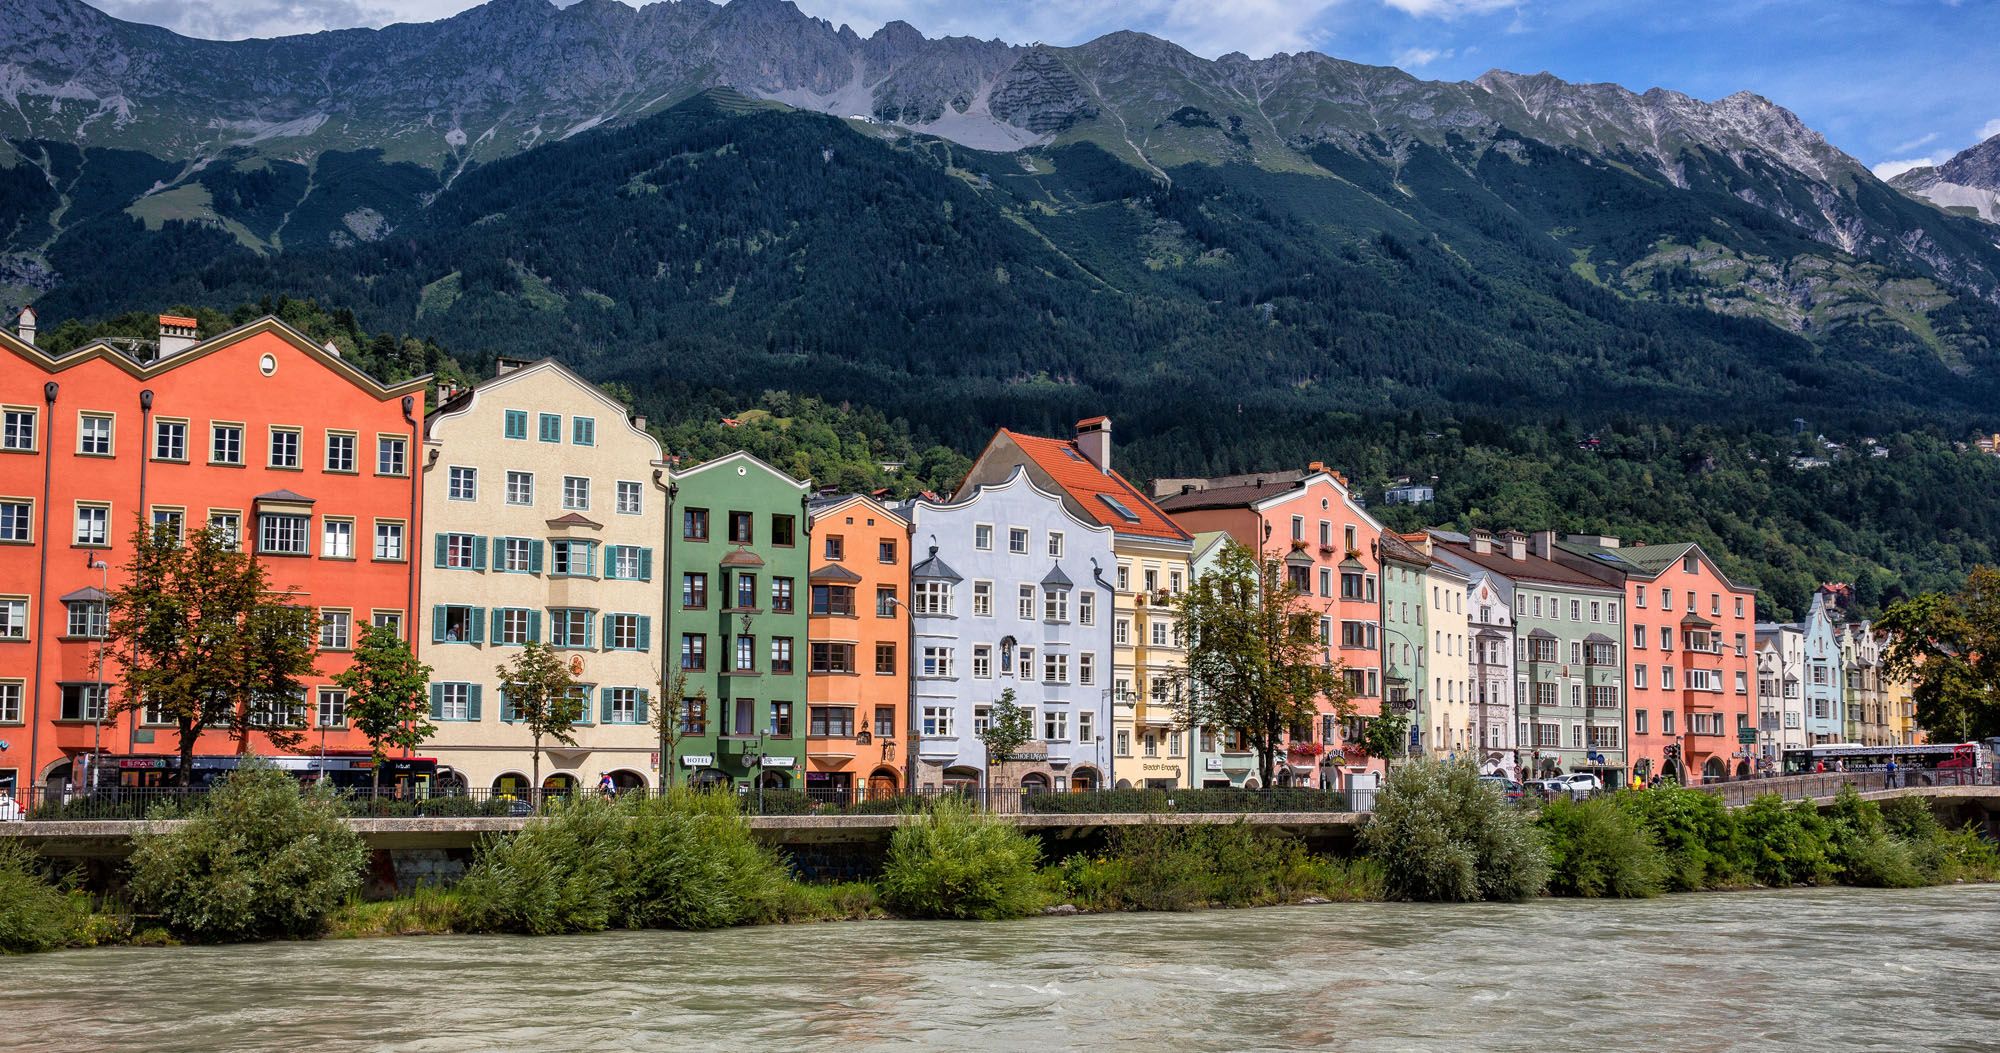 Featured image for “8 Great Things to Do in Innsbruck, Austria”